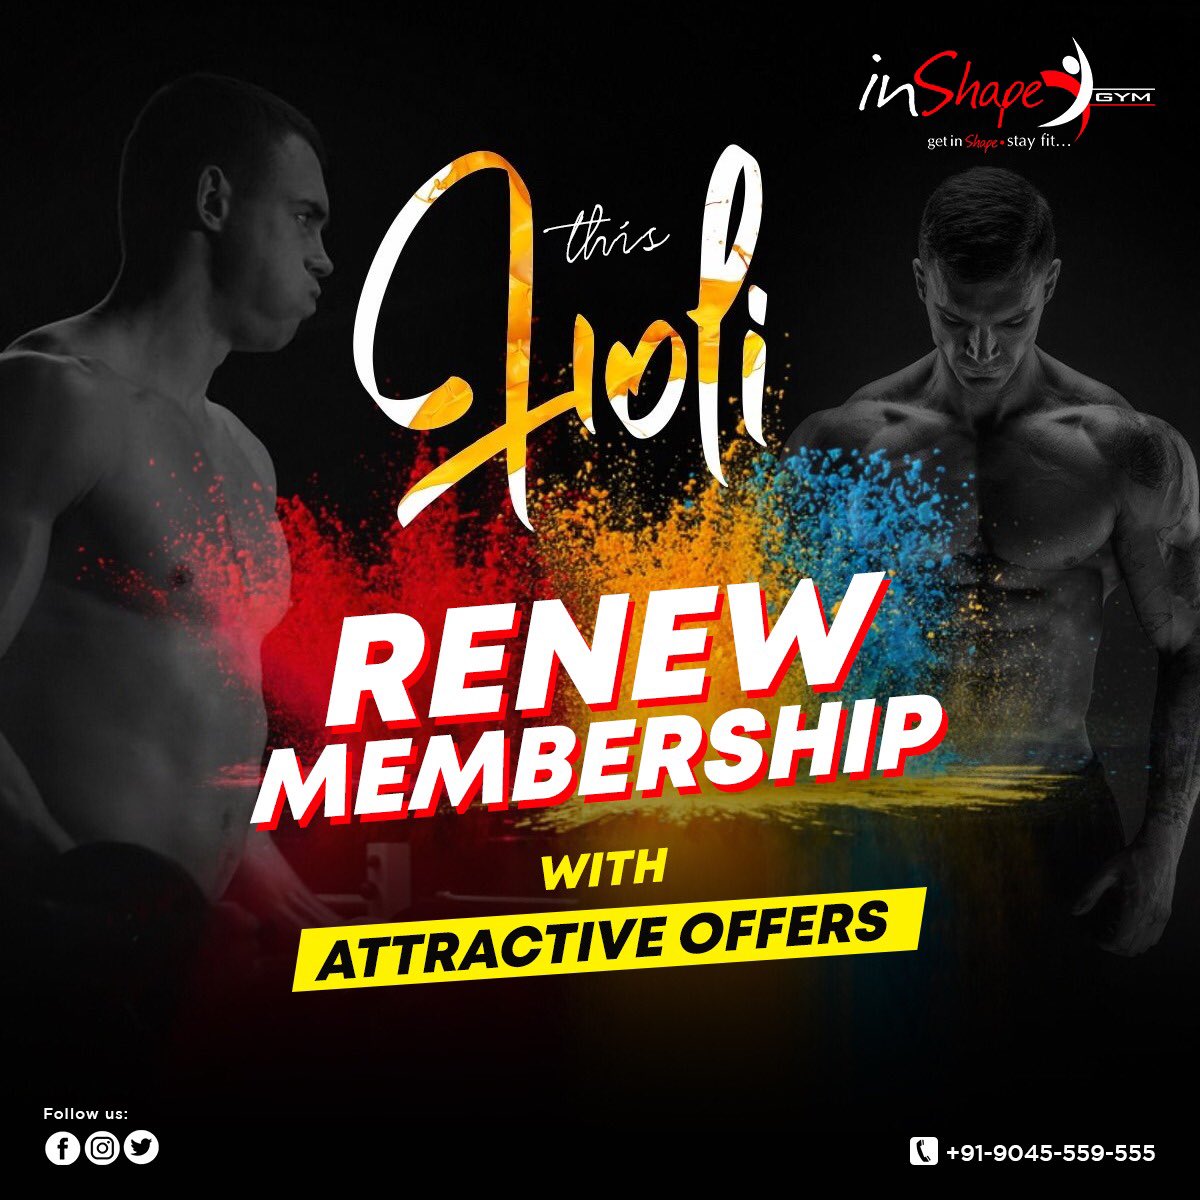 Renew your gym membership this Holi and get ready to crush your fitness goals with @GymInshape 's unbeatable offers!

#inshapegym #offer #holispecial #specialoffer #holioffer #reelsvideo #fitnessgoals #instapost #gymmotivation #gym #reelitfeelit #viralreels #meerut #meerutcity